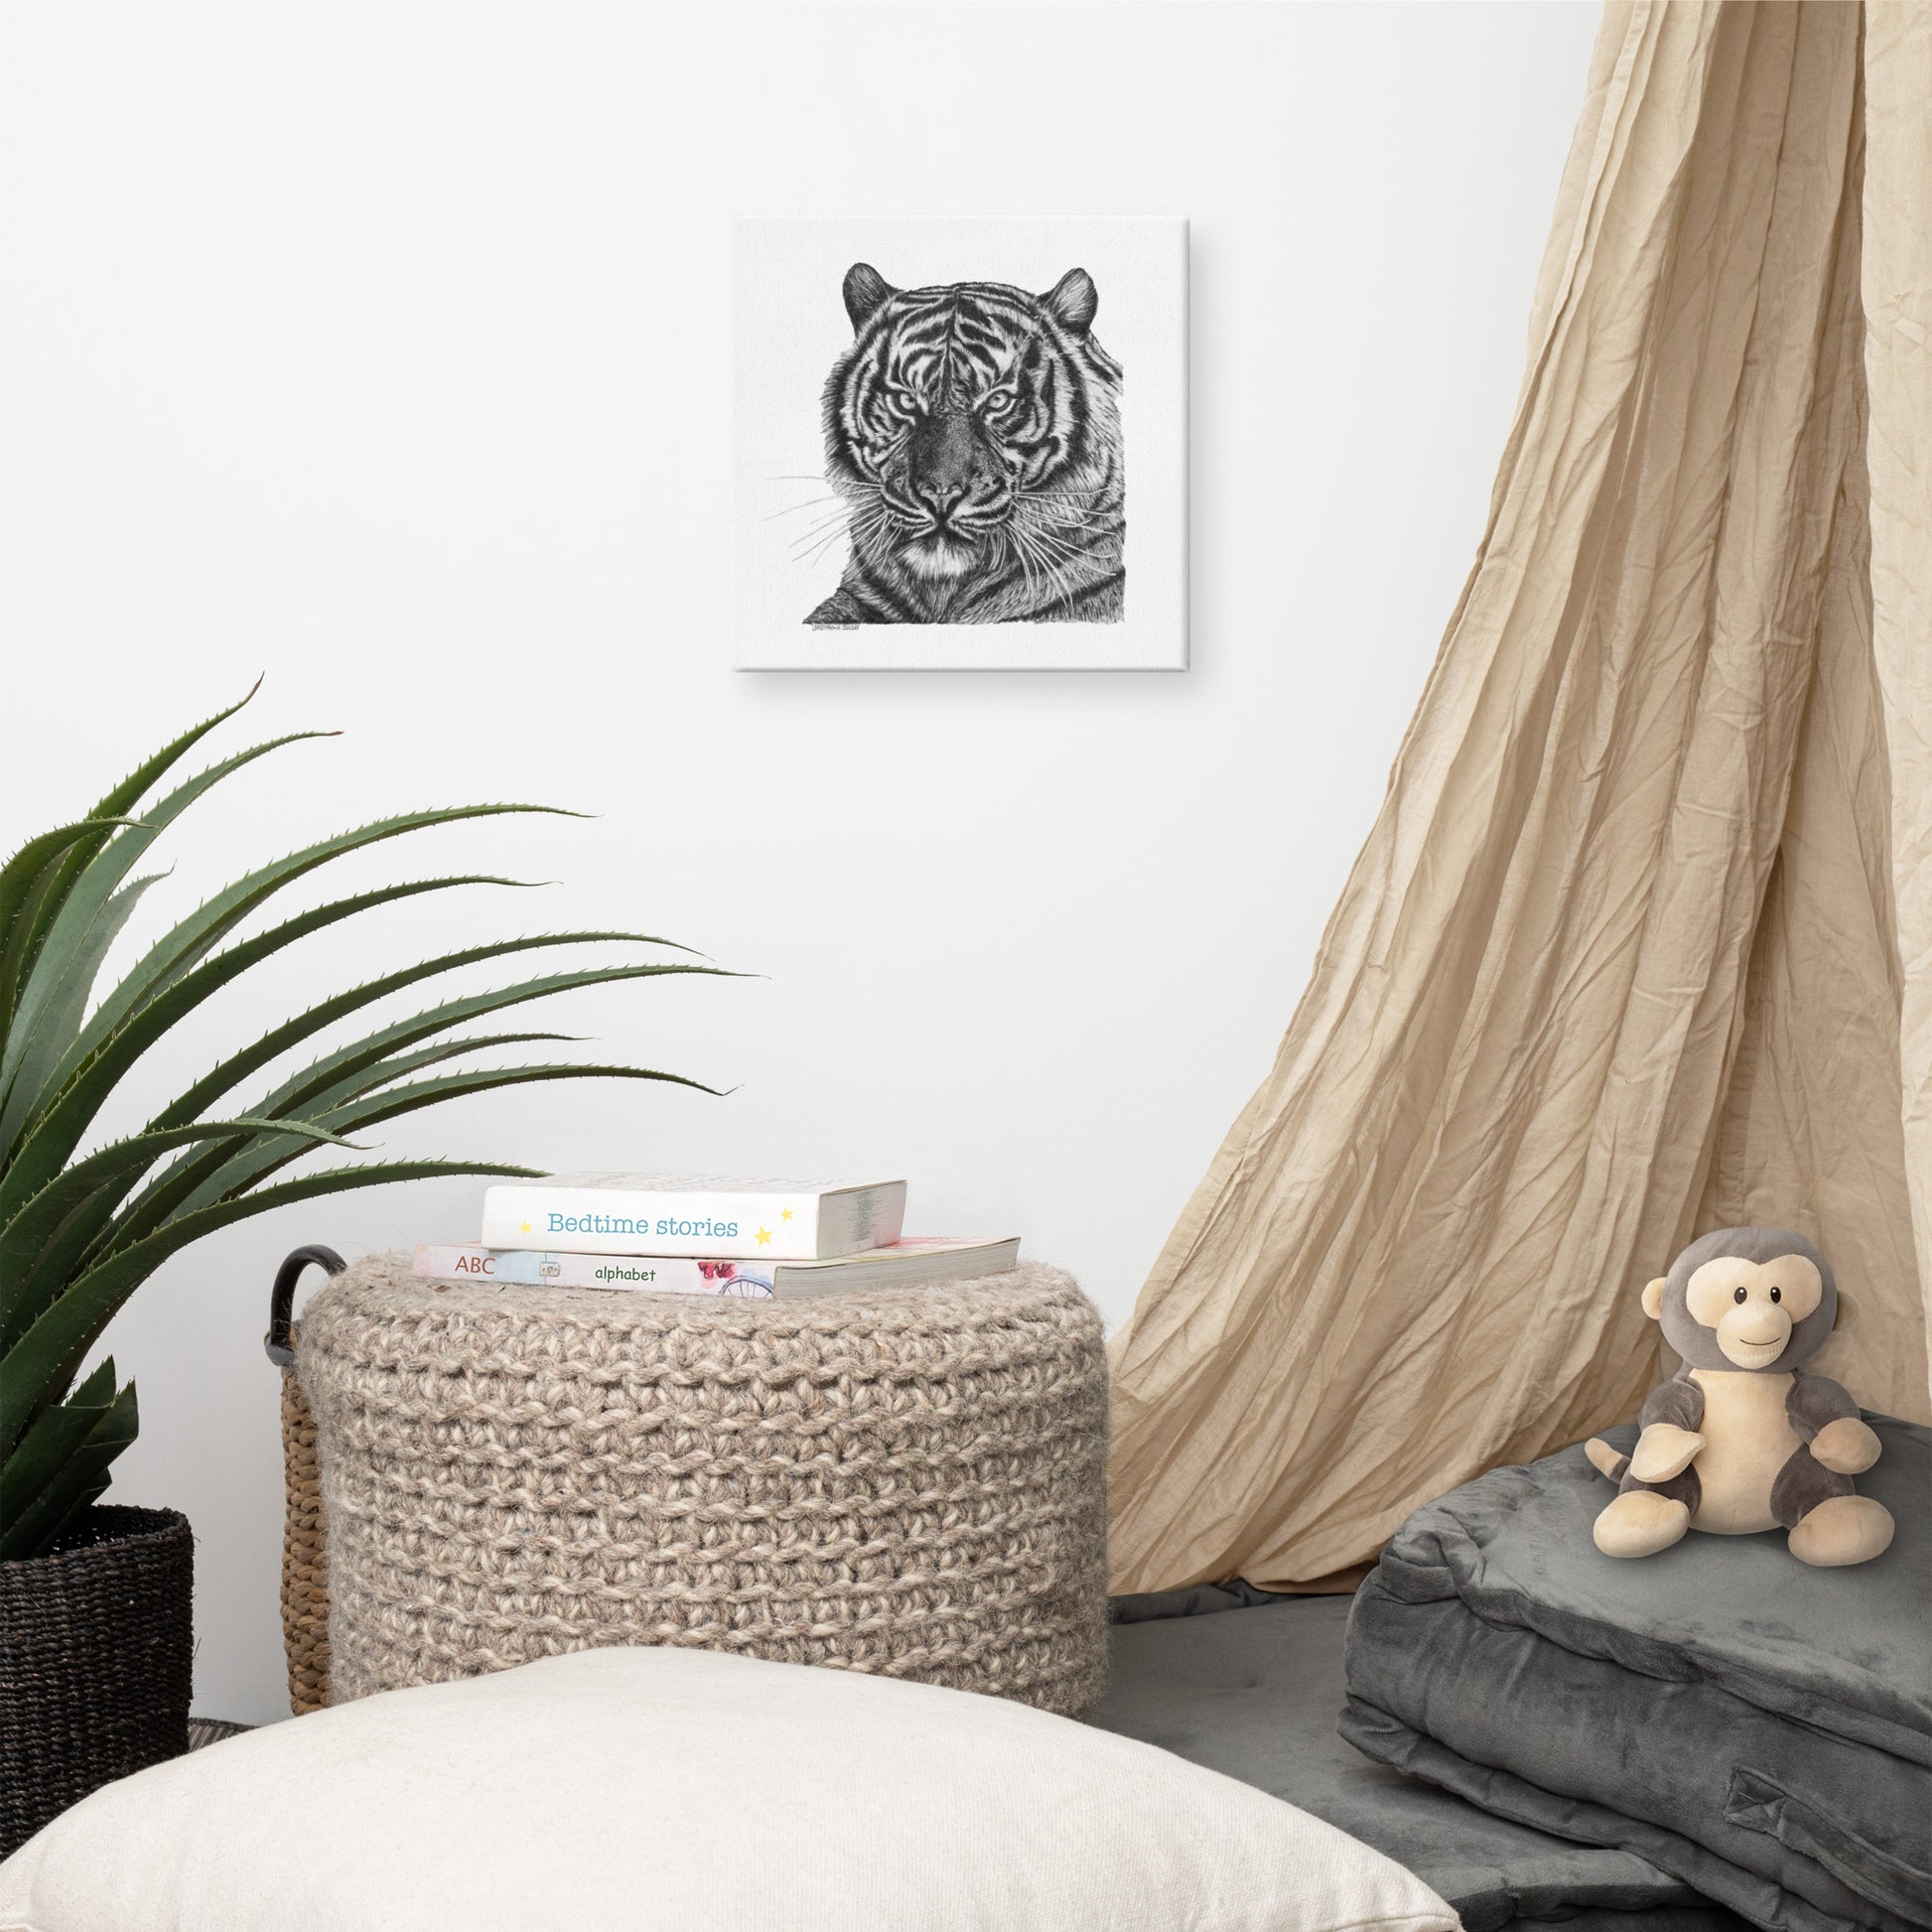 This "Tiger Canvas Wall Hanging" is from a drawing of mine created with a graphite pencil. It has been digitally optimized and transferred to a poly-cotton blend canvas.